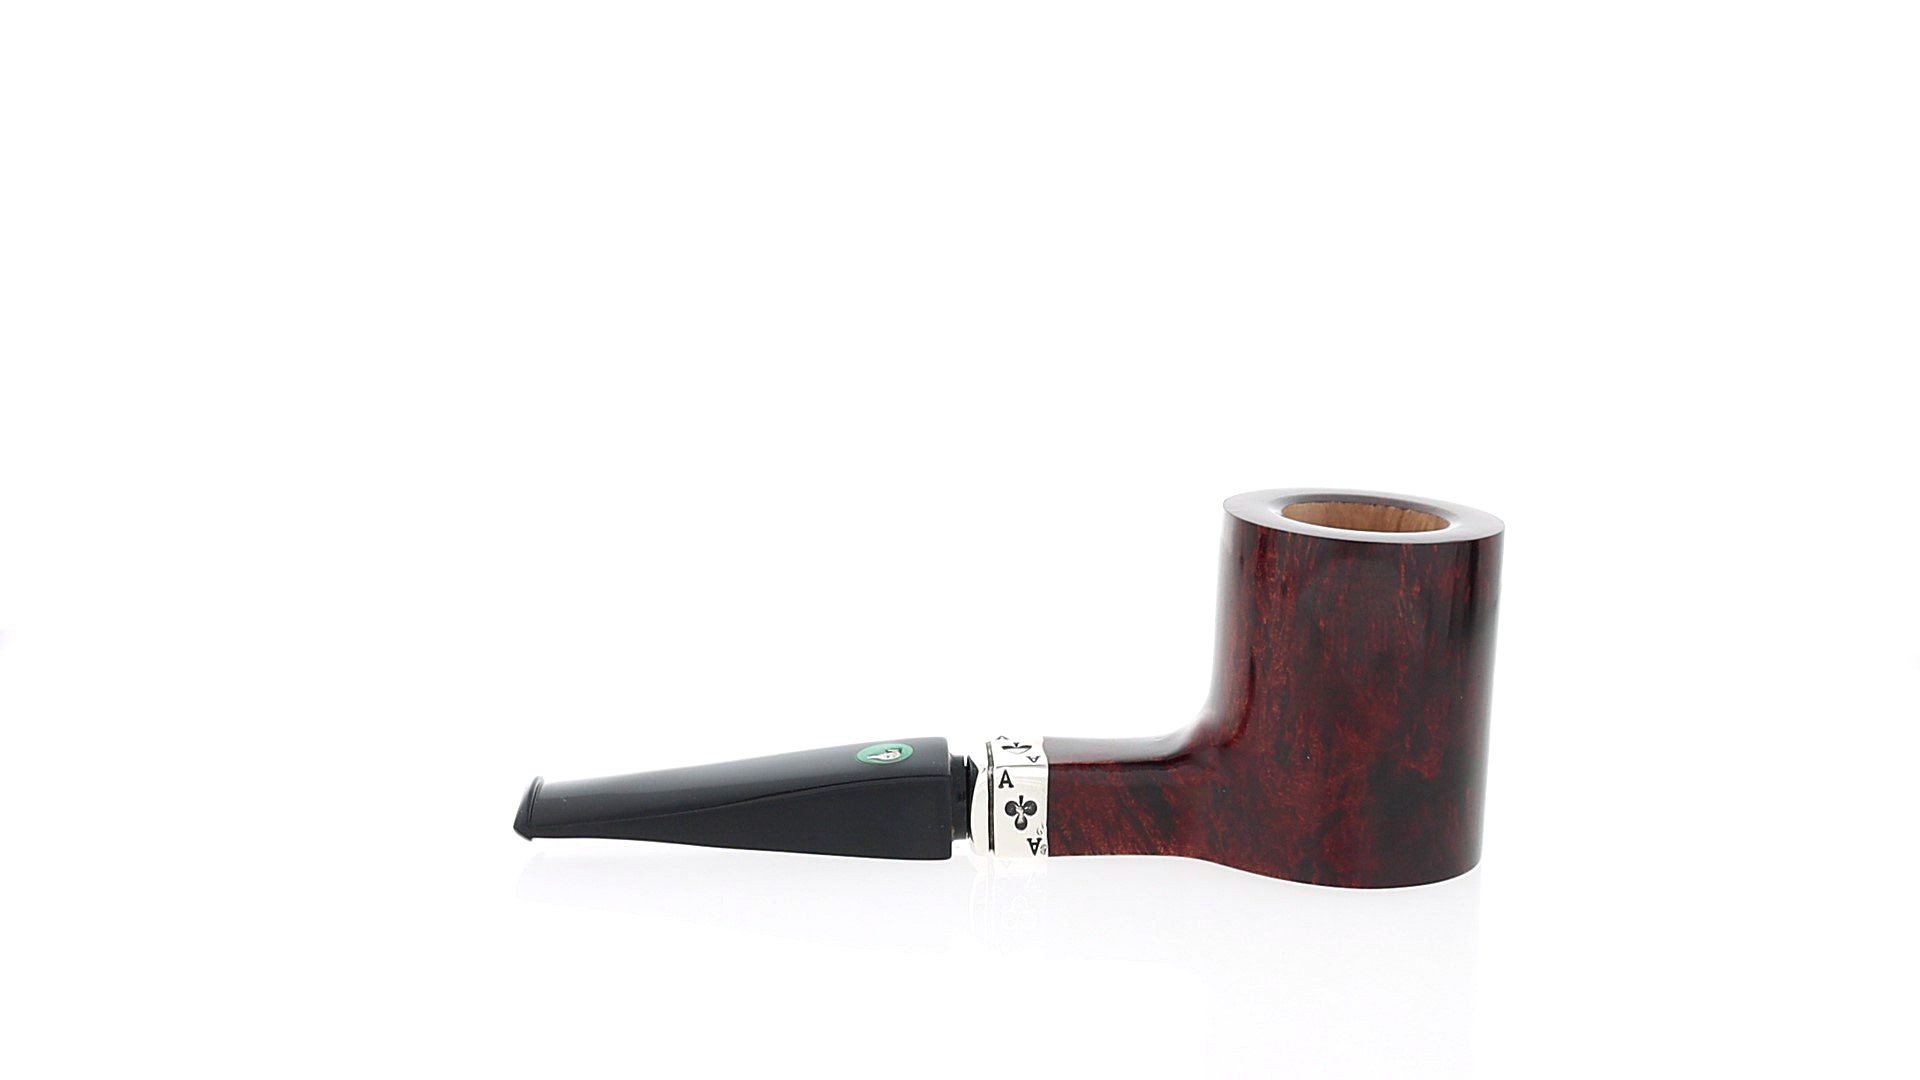 The duck shaped pipe Poker of aces in glossy dark briar